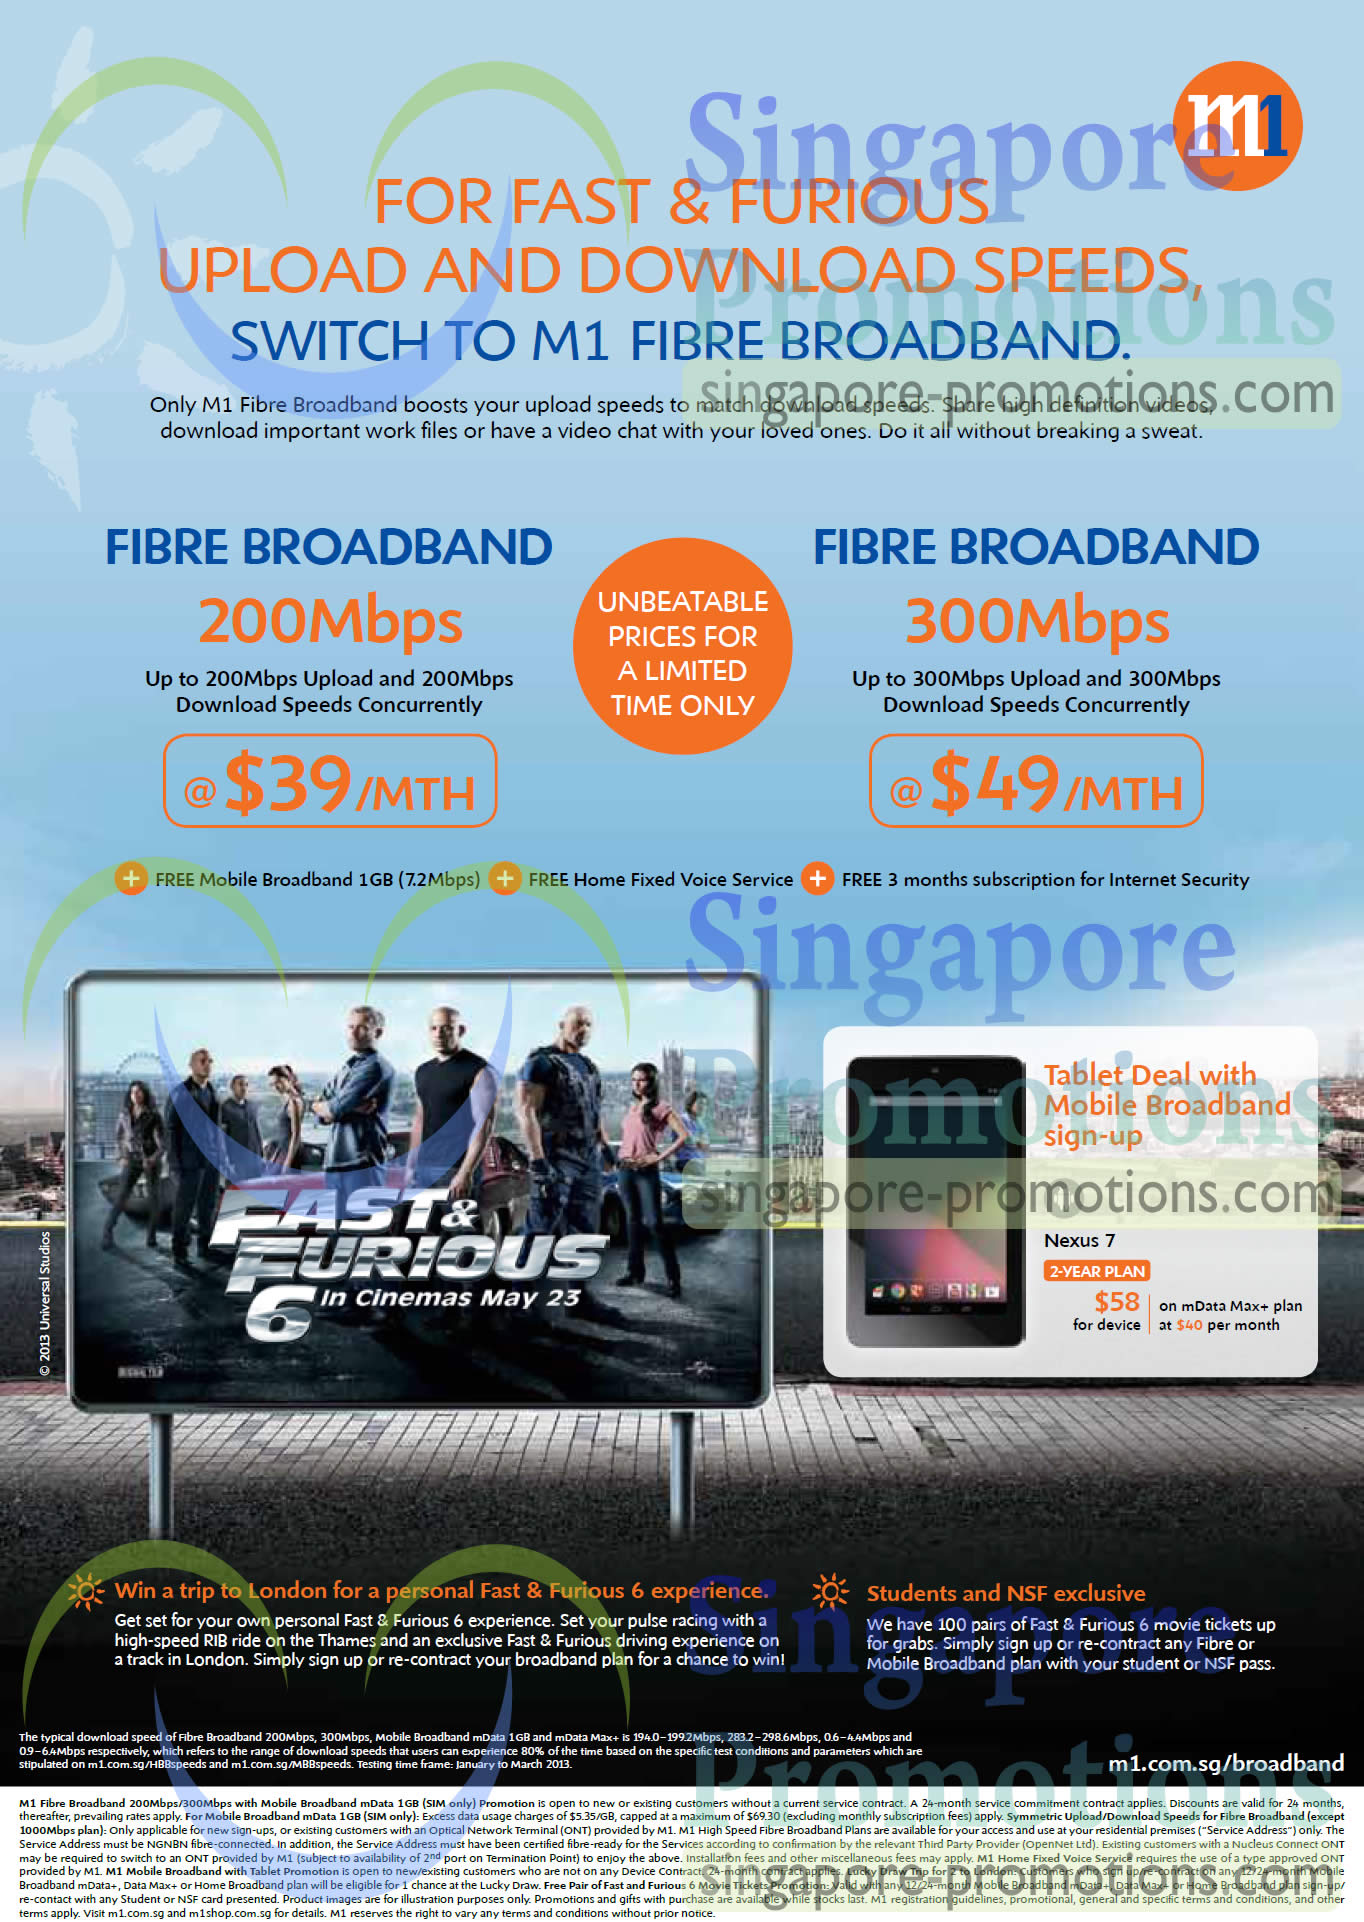 Featured image for M1 Smartphones, Tablets & Home/Mobile Broadband Offers 11 - 17 May 2013